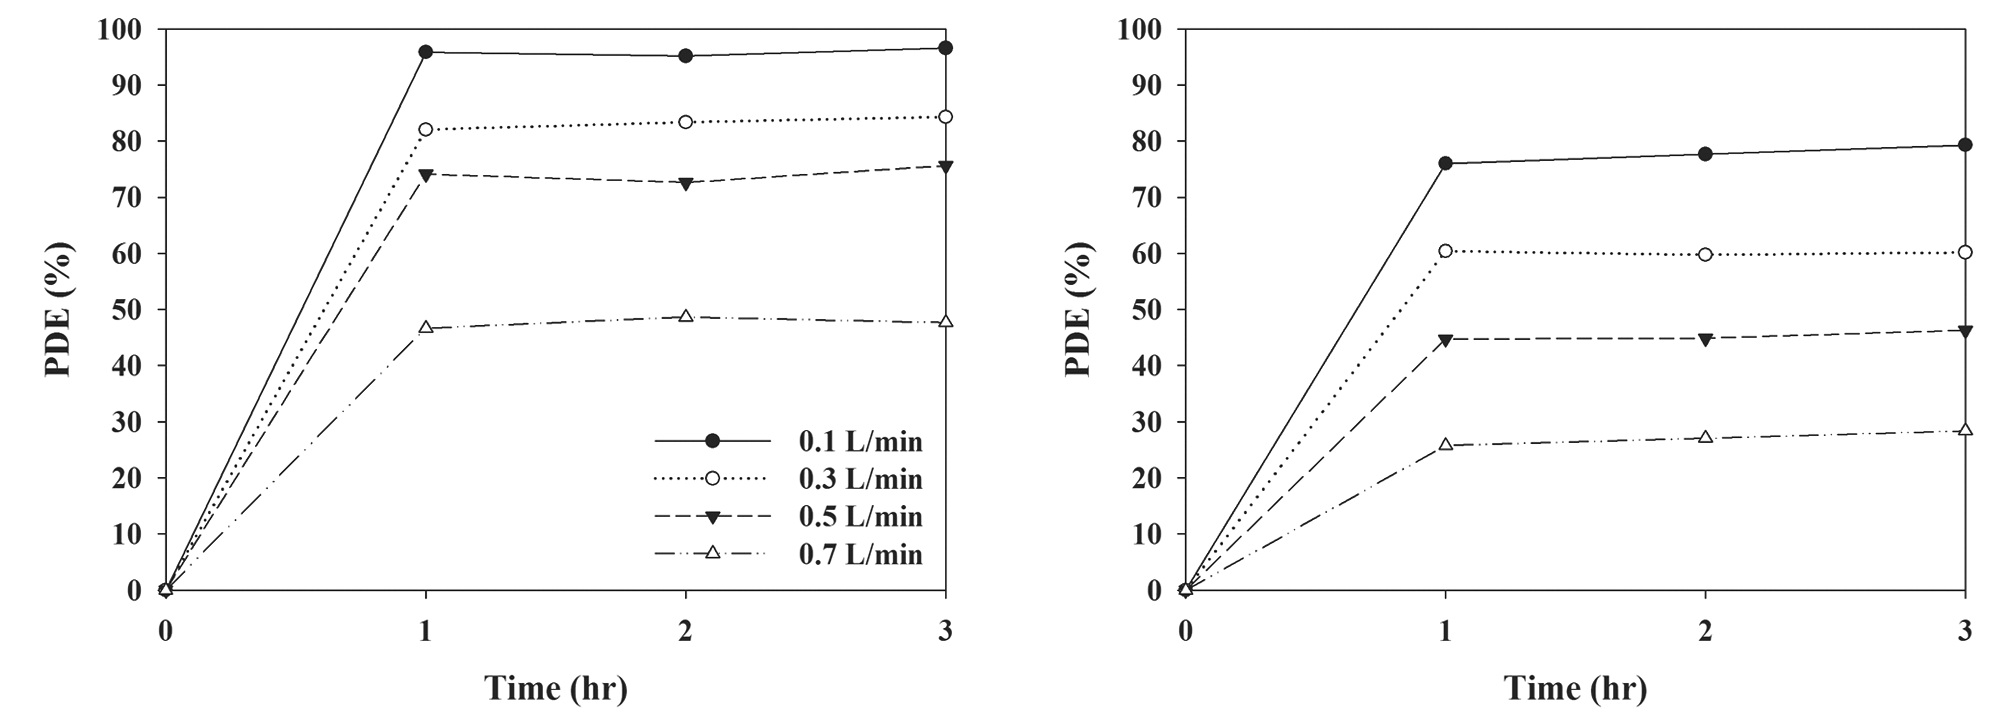 Photocatalytic degradation efficiencies for (a) trichloroethylene and (b) perchloroethylene as determined using a LED-activated N-TiO2 photocatalytic system according to stream flow rate (0.1, 0.3, 0.5, and 0.7 L/min). LED: light-emitting diode, N-TiO2: N-doped titanium dioxide, PDE: photocatalytic degradation efficiency.